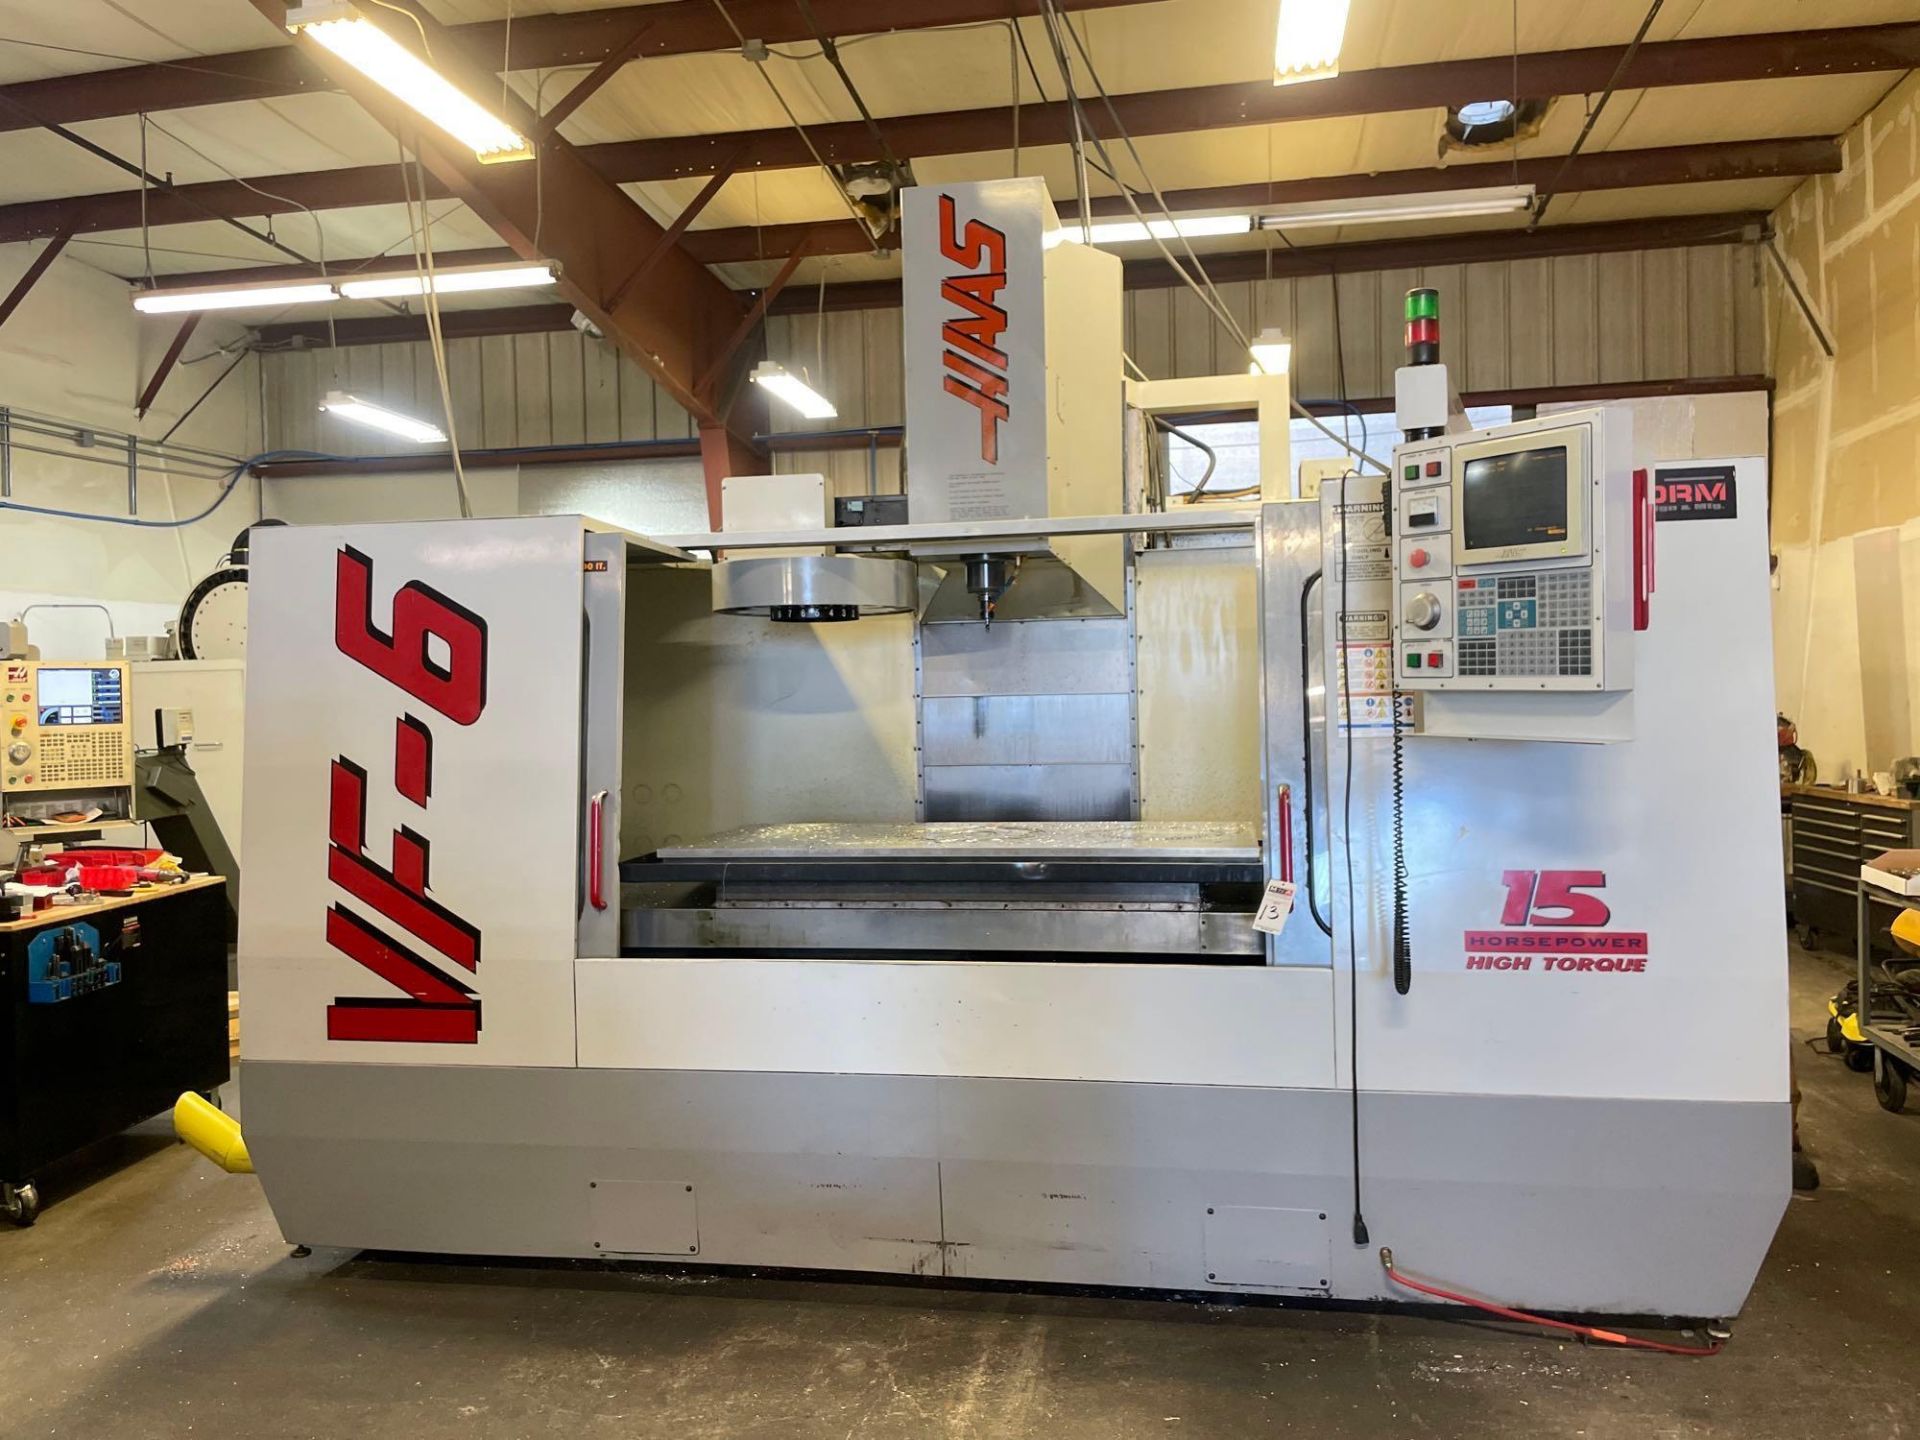 Haas VF-6 4-Axis Ready Vertical Machining Center, 64” x 32” x 30” Trvls., CT40, 20 ATC, New 1997 - Image 2 of 10